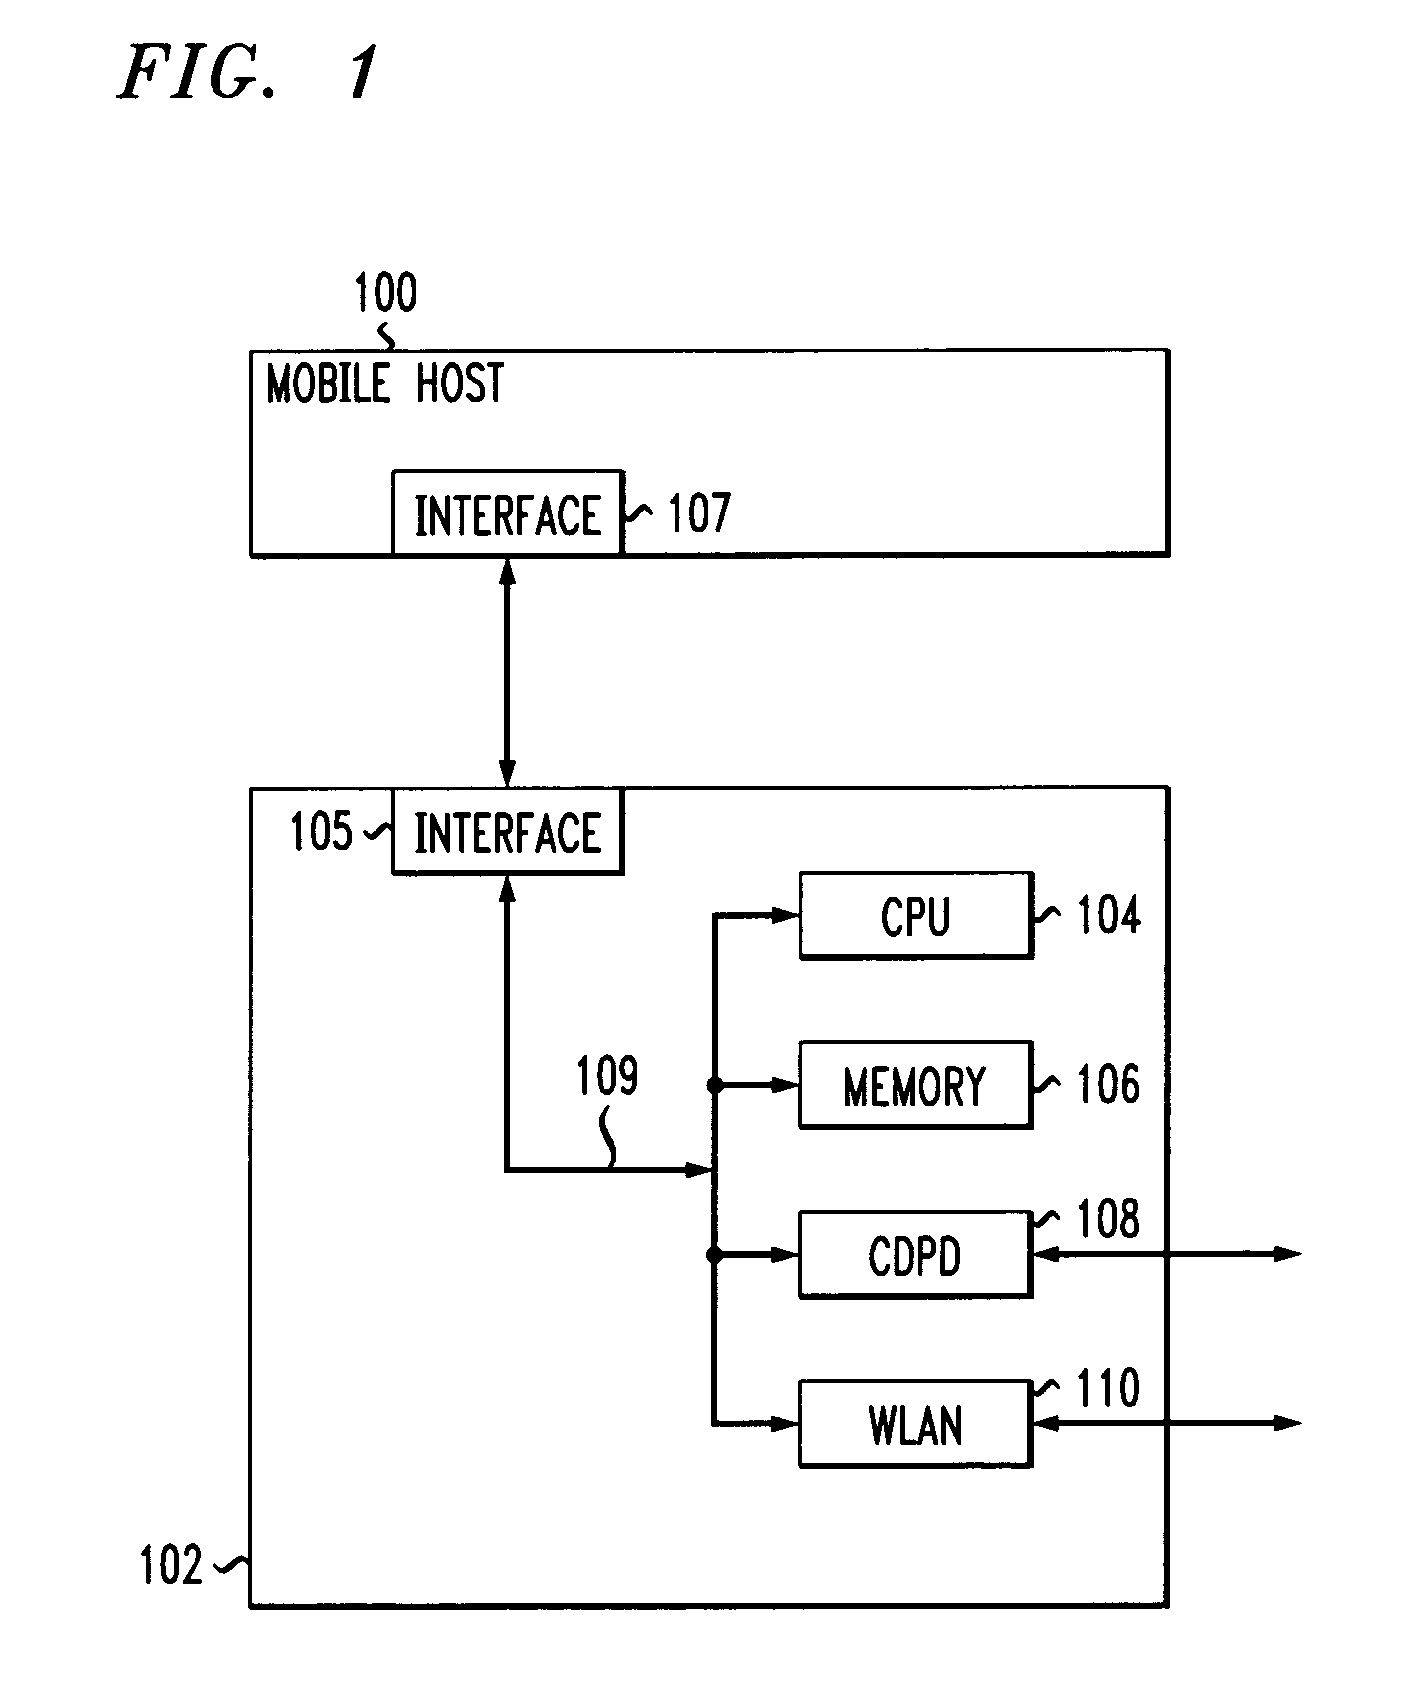 Mobile host using a virtual single account client and server system for network access and management